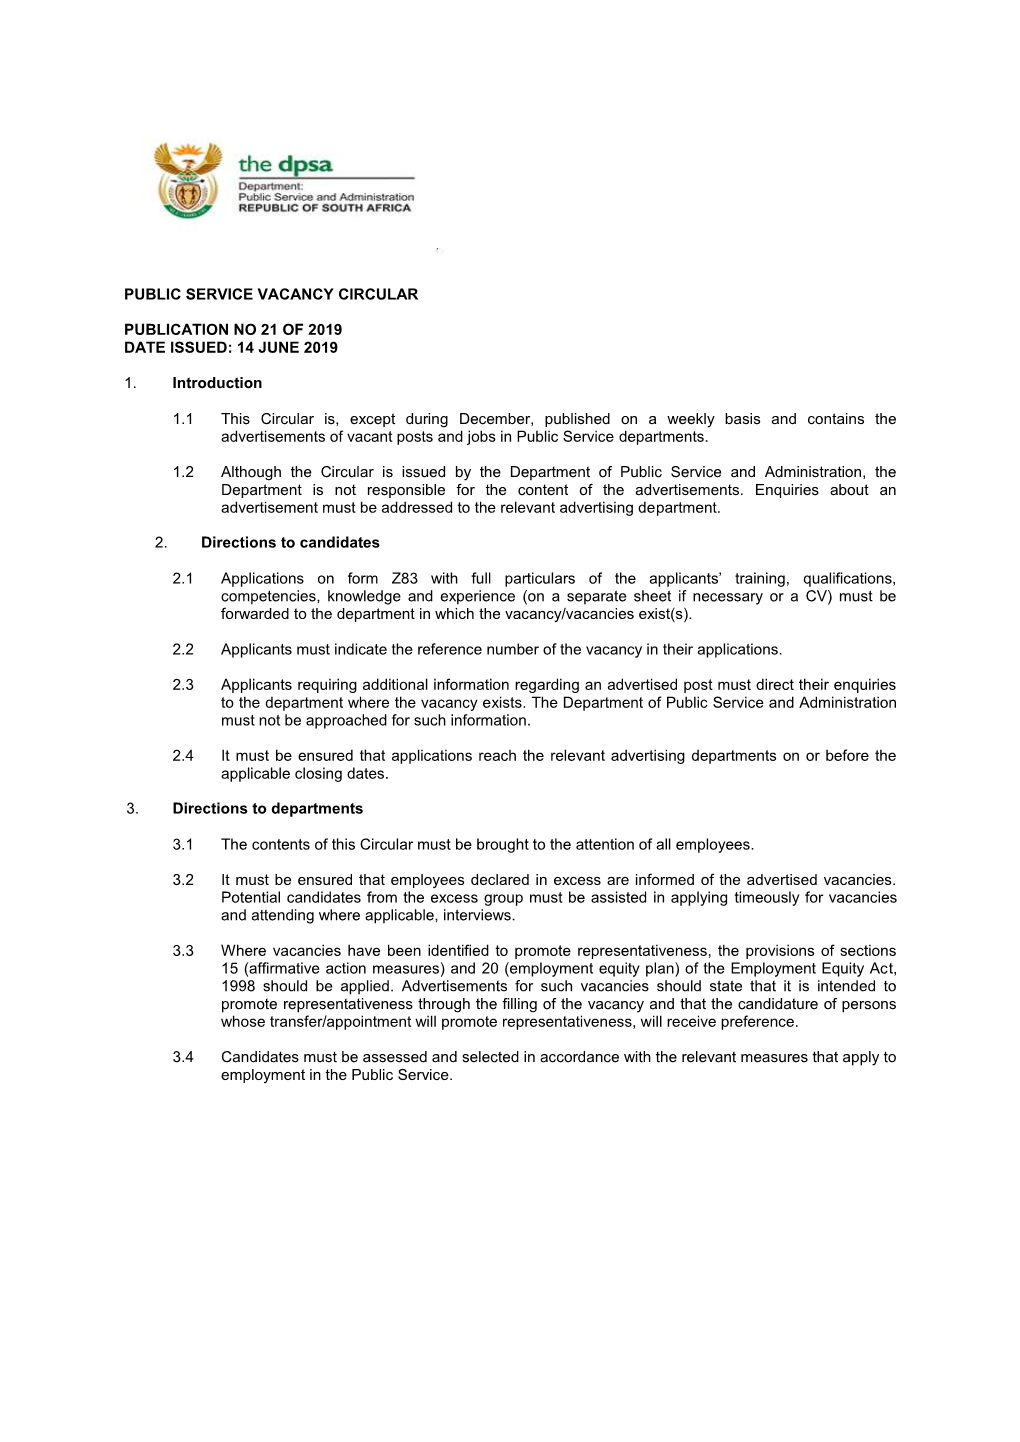 PUBLIC SERVICE VACANCY CIRCULAR PUBLICATION NO 21 of 2019 DATE ISSUED: 14 JUNE 2019 1. Introduction 1.1 This Circular Is, Except